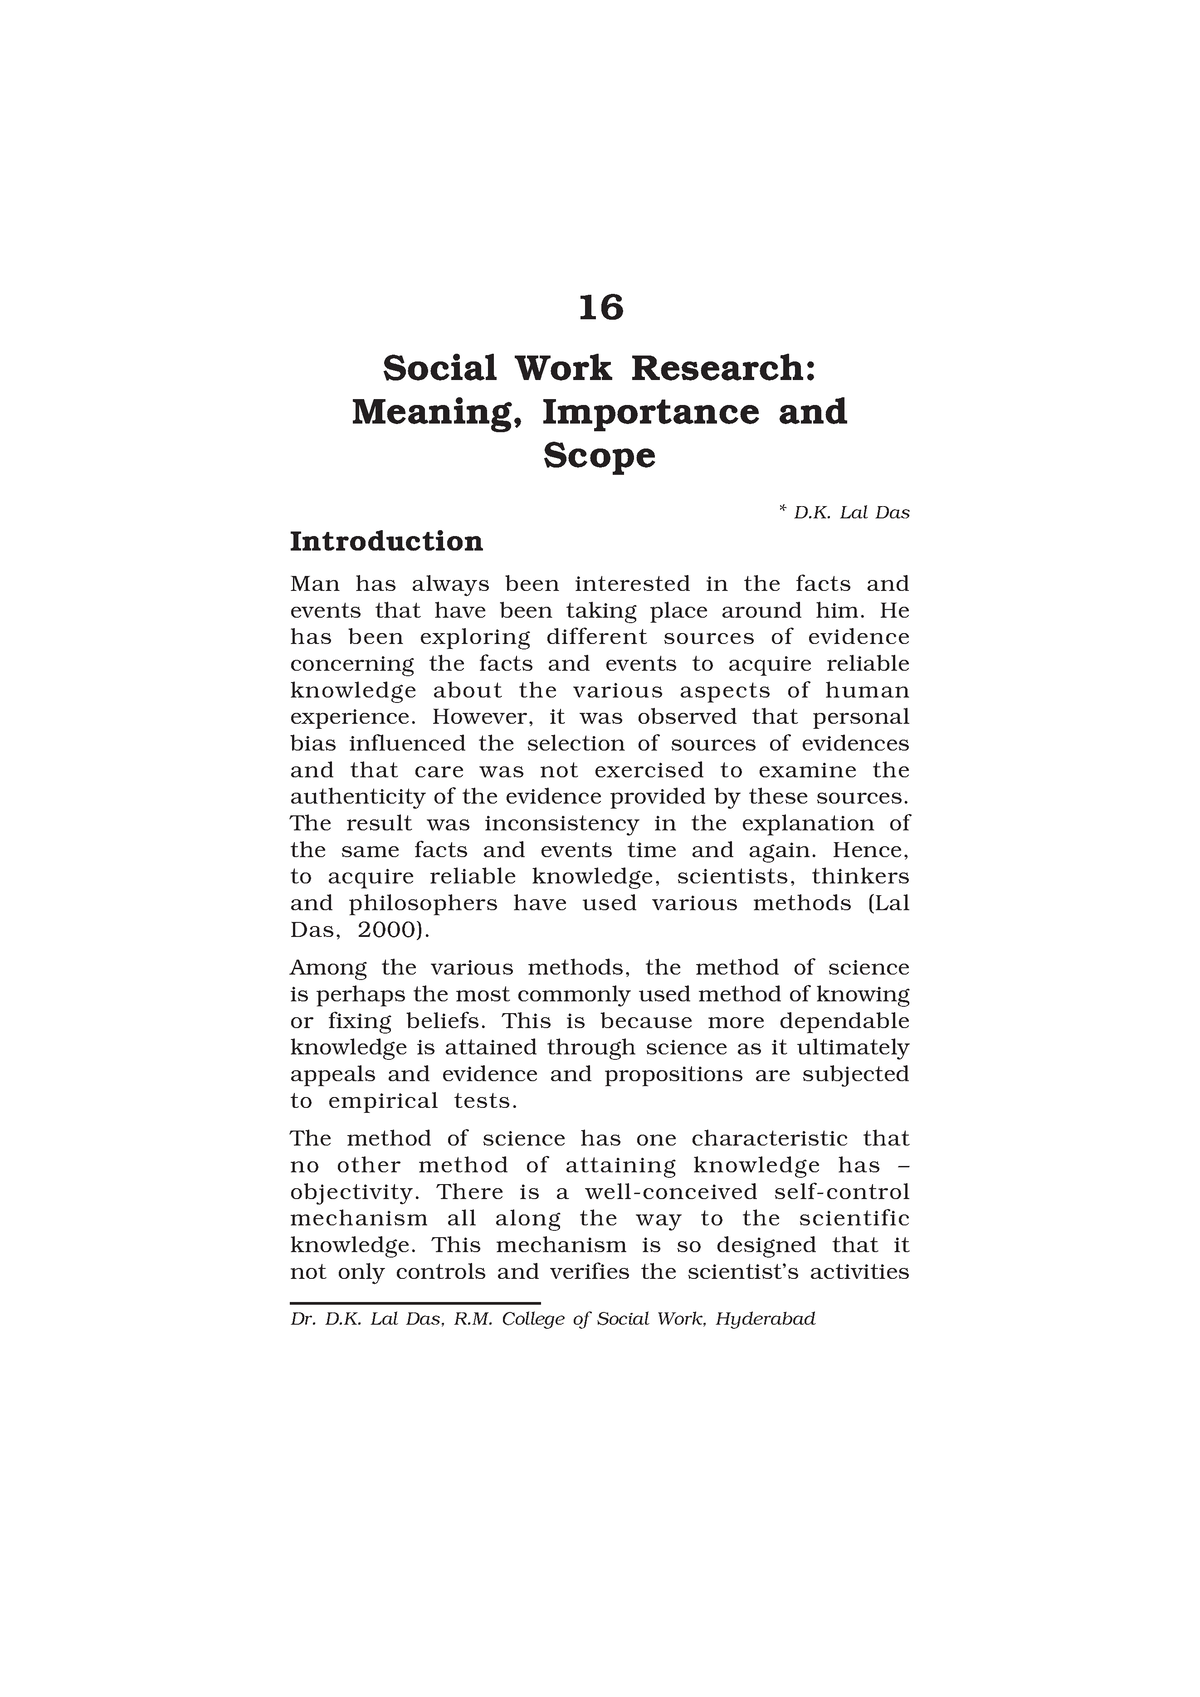 statistics in social work research meaning